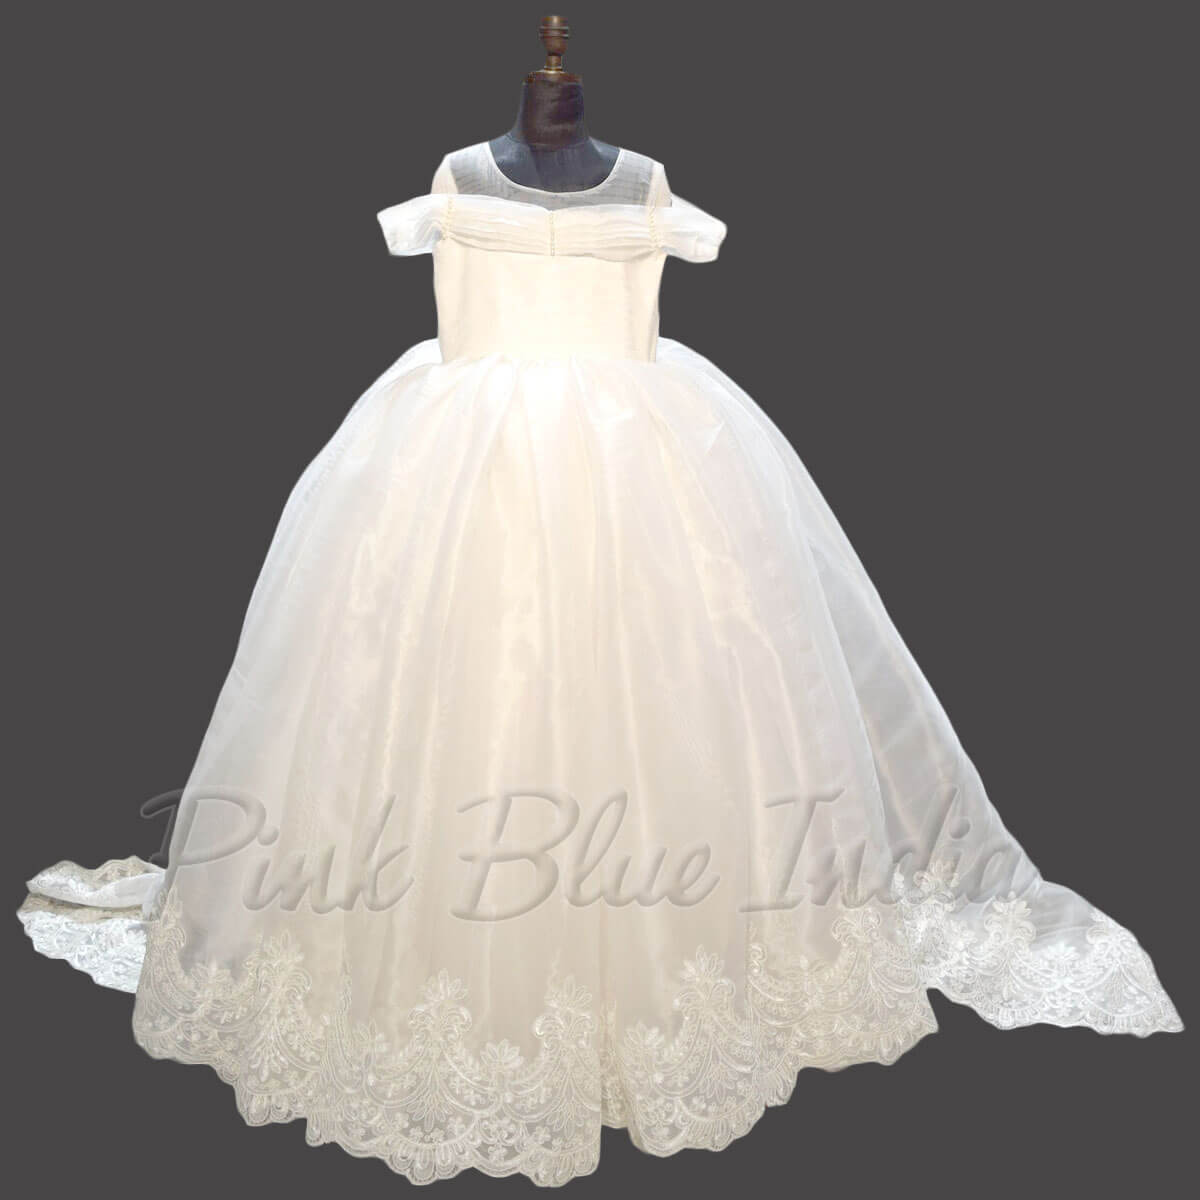 Gorgeous Baby Events Party Wear Tutu White Tulle Infant Christening Gowns  Children's Princess Outfit For Evening Baptism Vestido